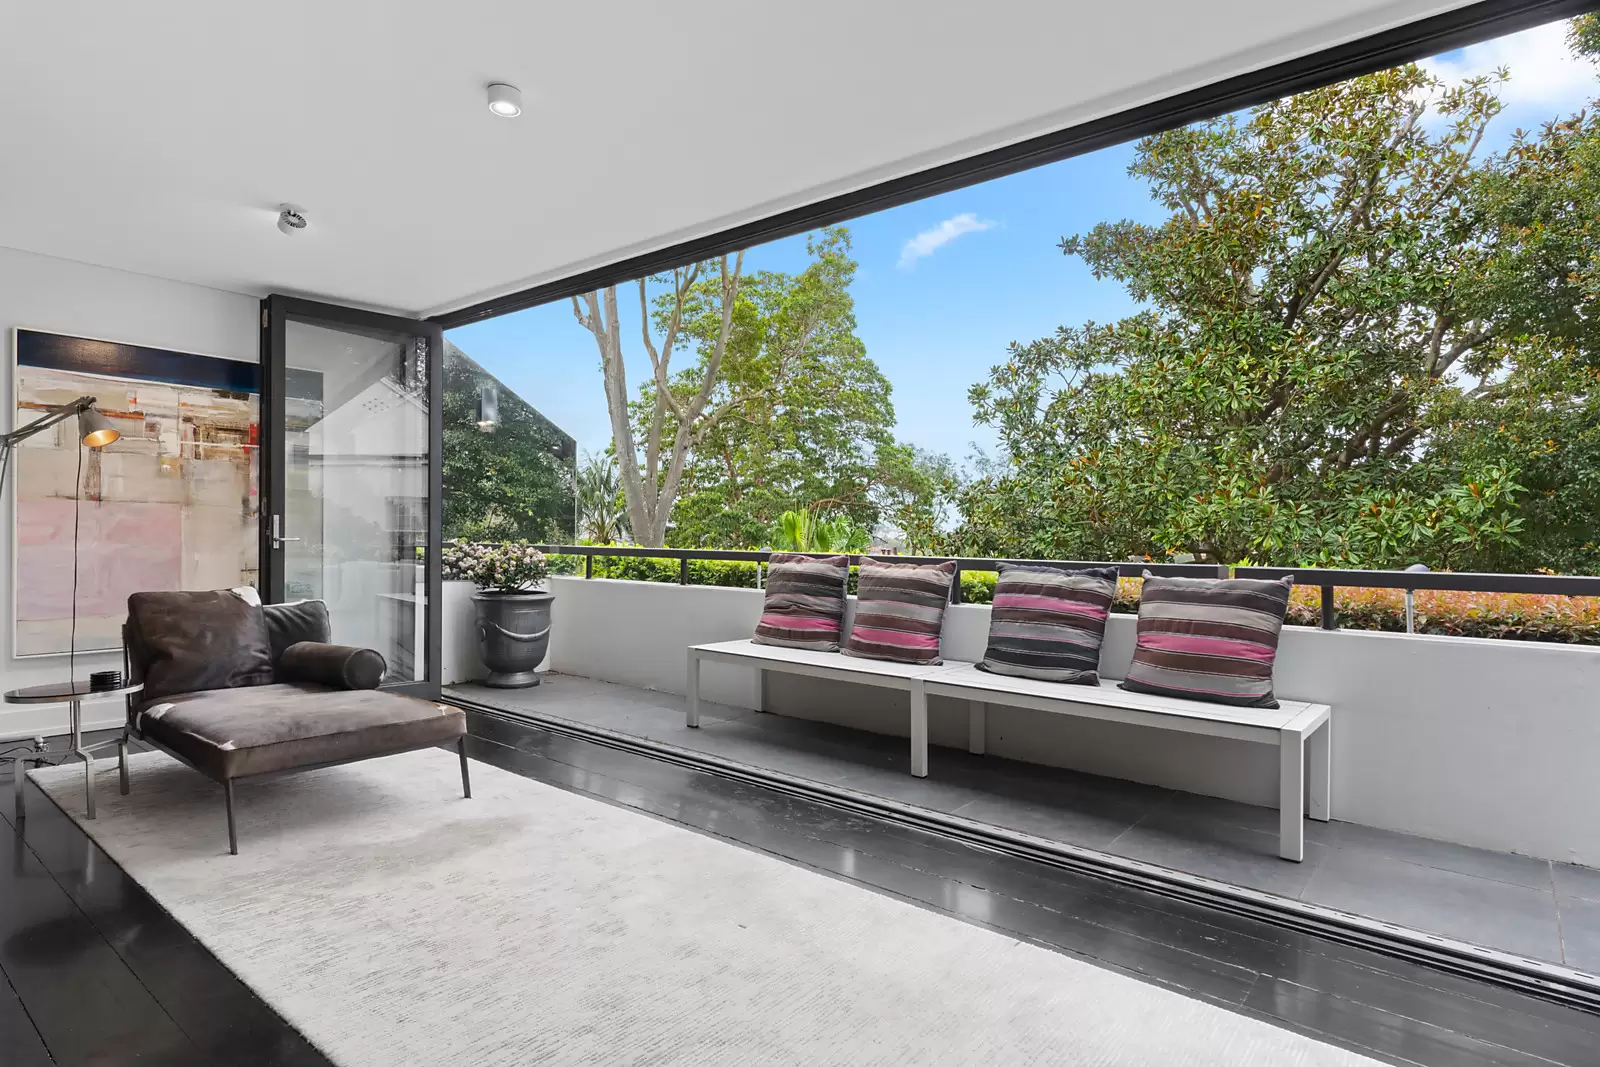 Photo #8: 19/339-341 Edgecliff Road, Edgecliff - Sold by Sydney Sotheby's International Realty